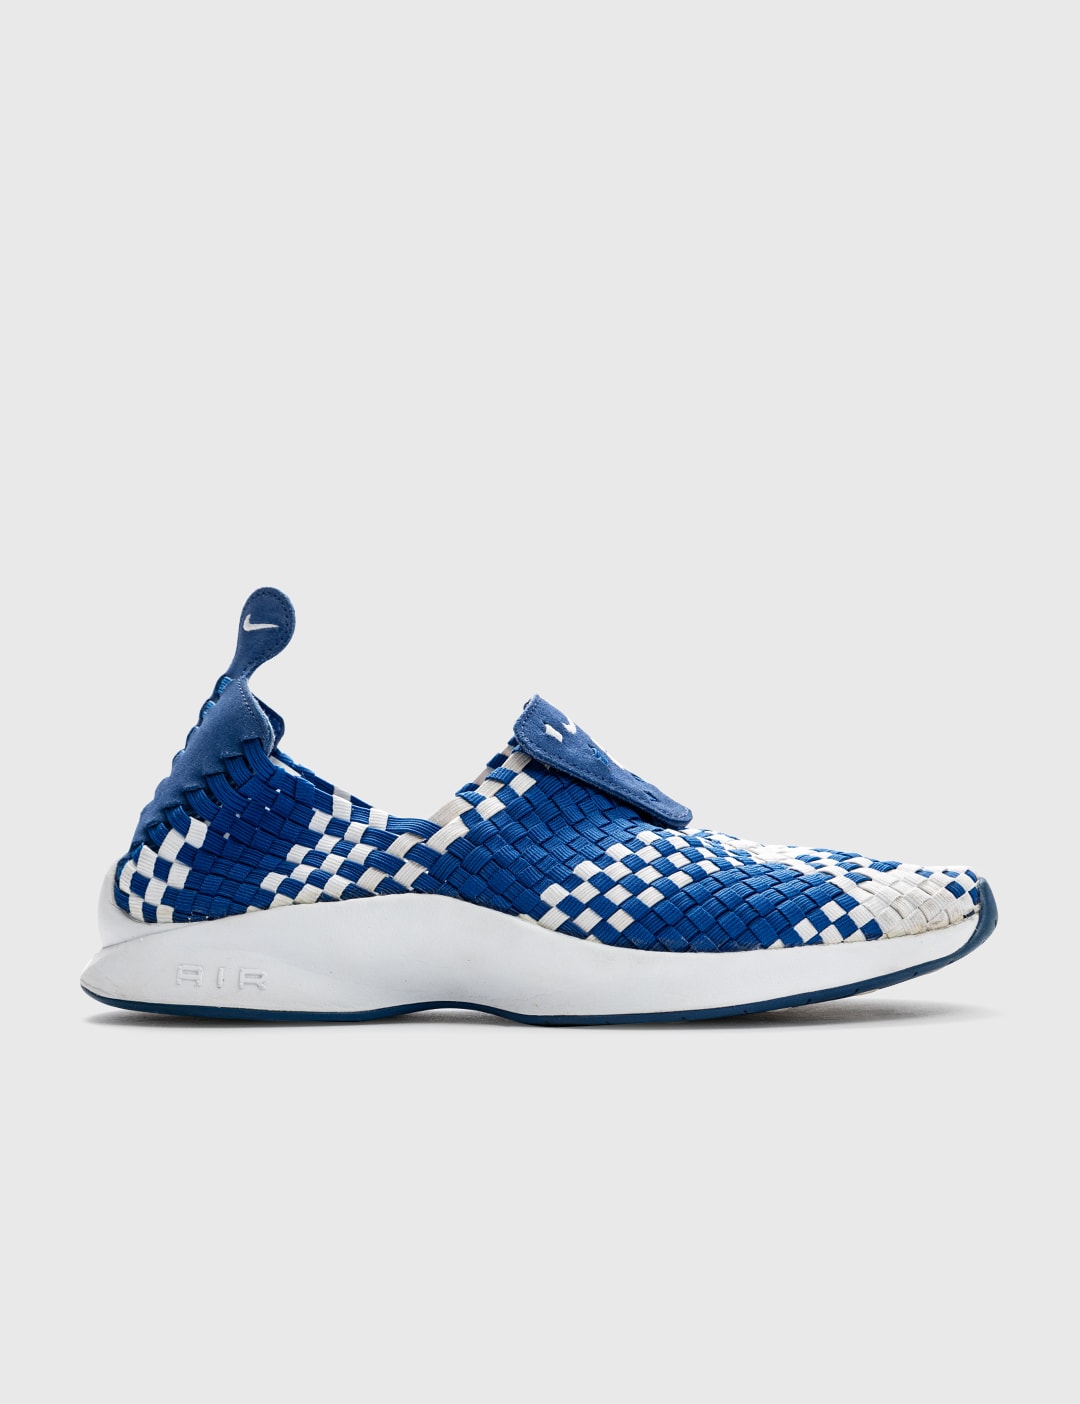 Nike - Colette x Nike Air Woven 'The Beach' | HBX - Globally Curated Fashion and by Hypebeast